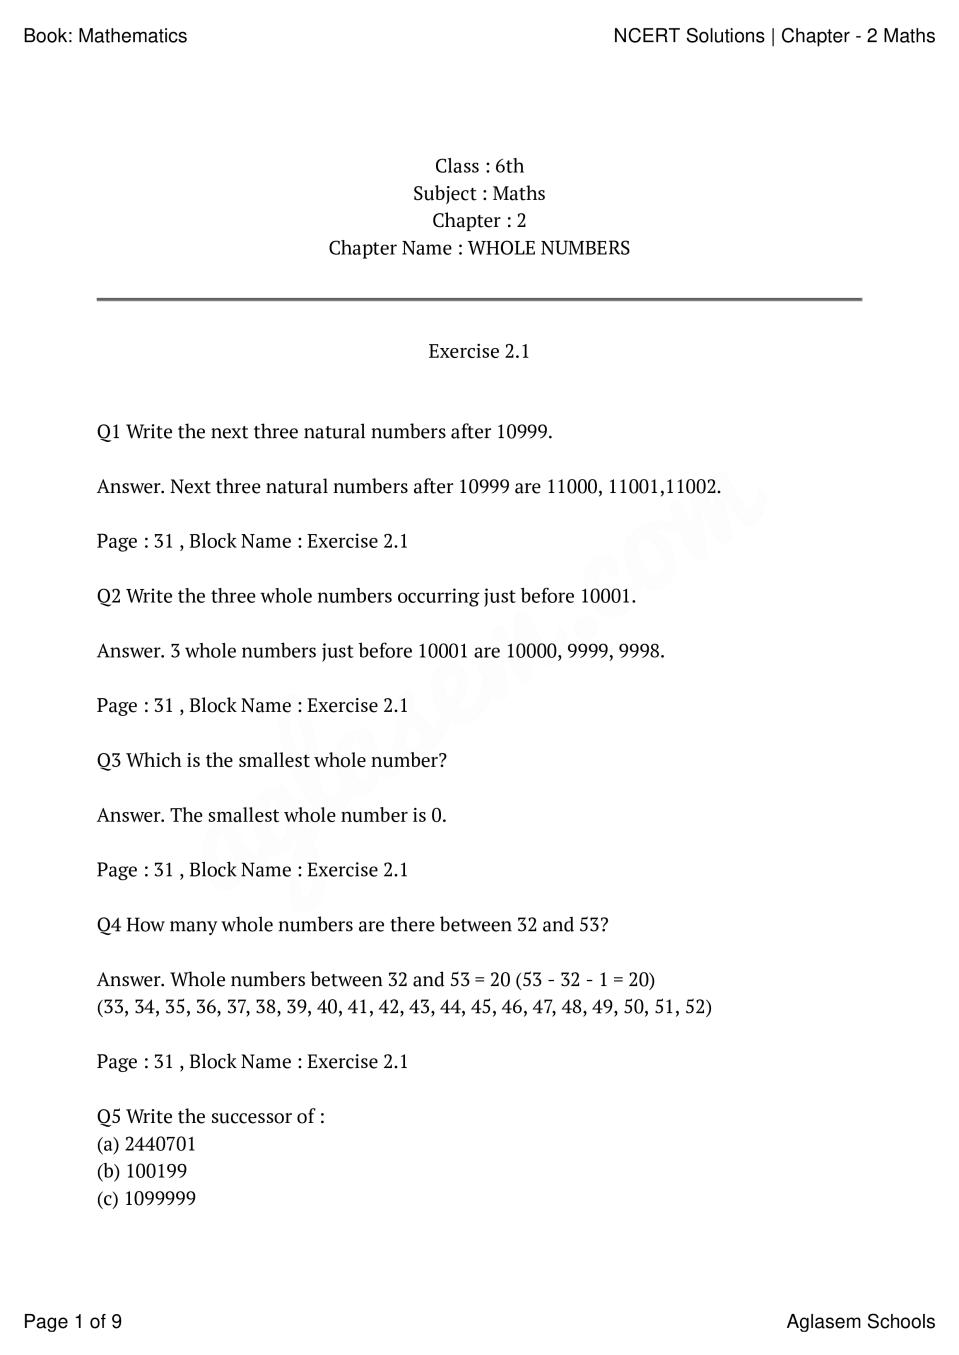 ncert-solutions-class-6-mathematics-chapter-2-whole-numbers-aglasem